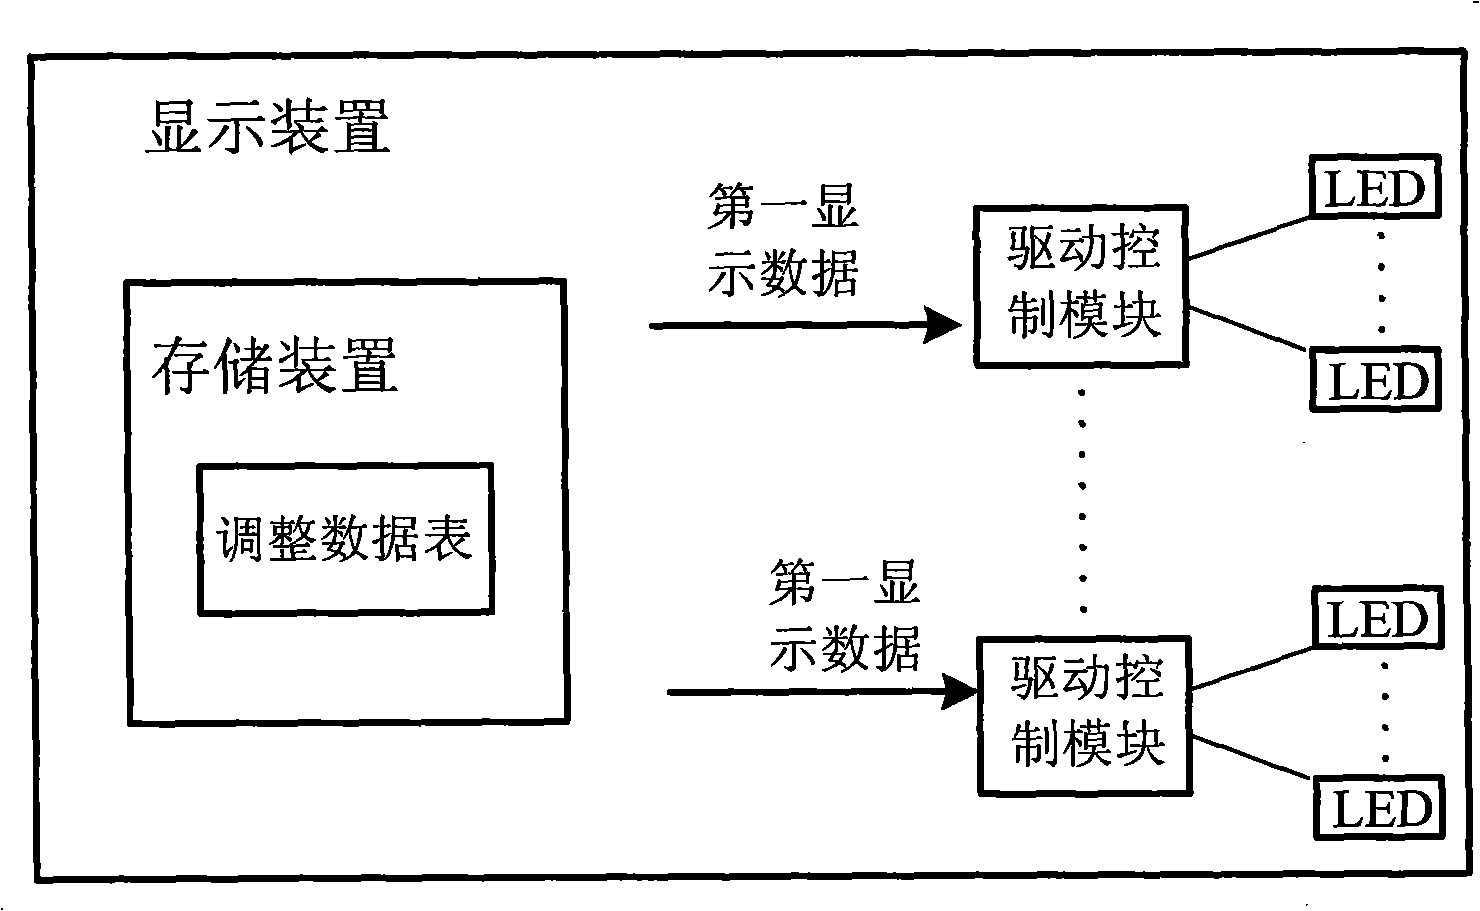 Display system of point-to-point brightness control and a method